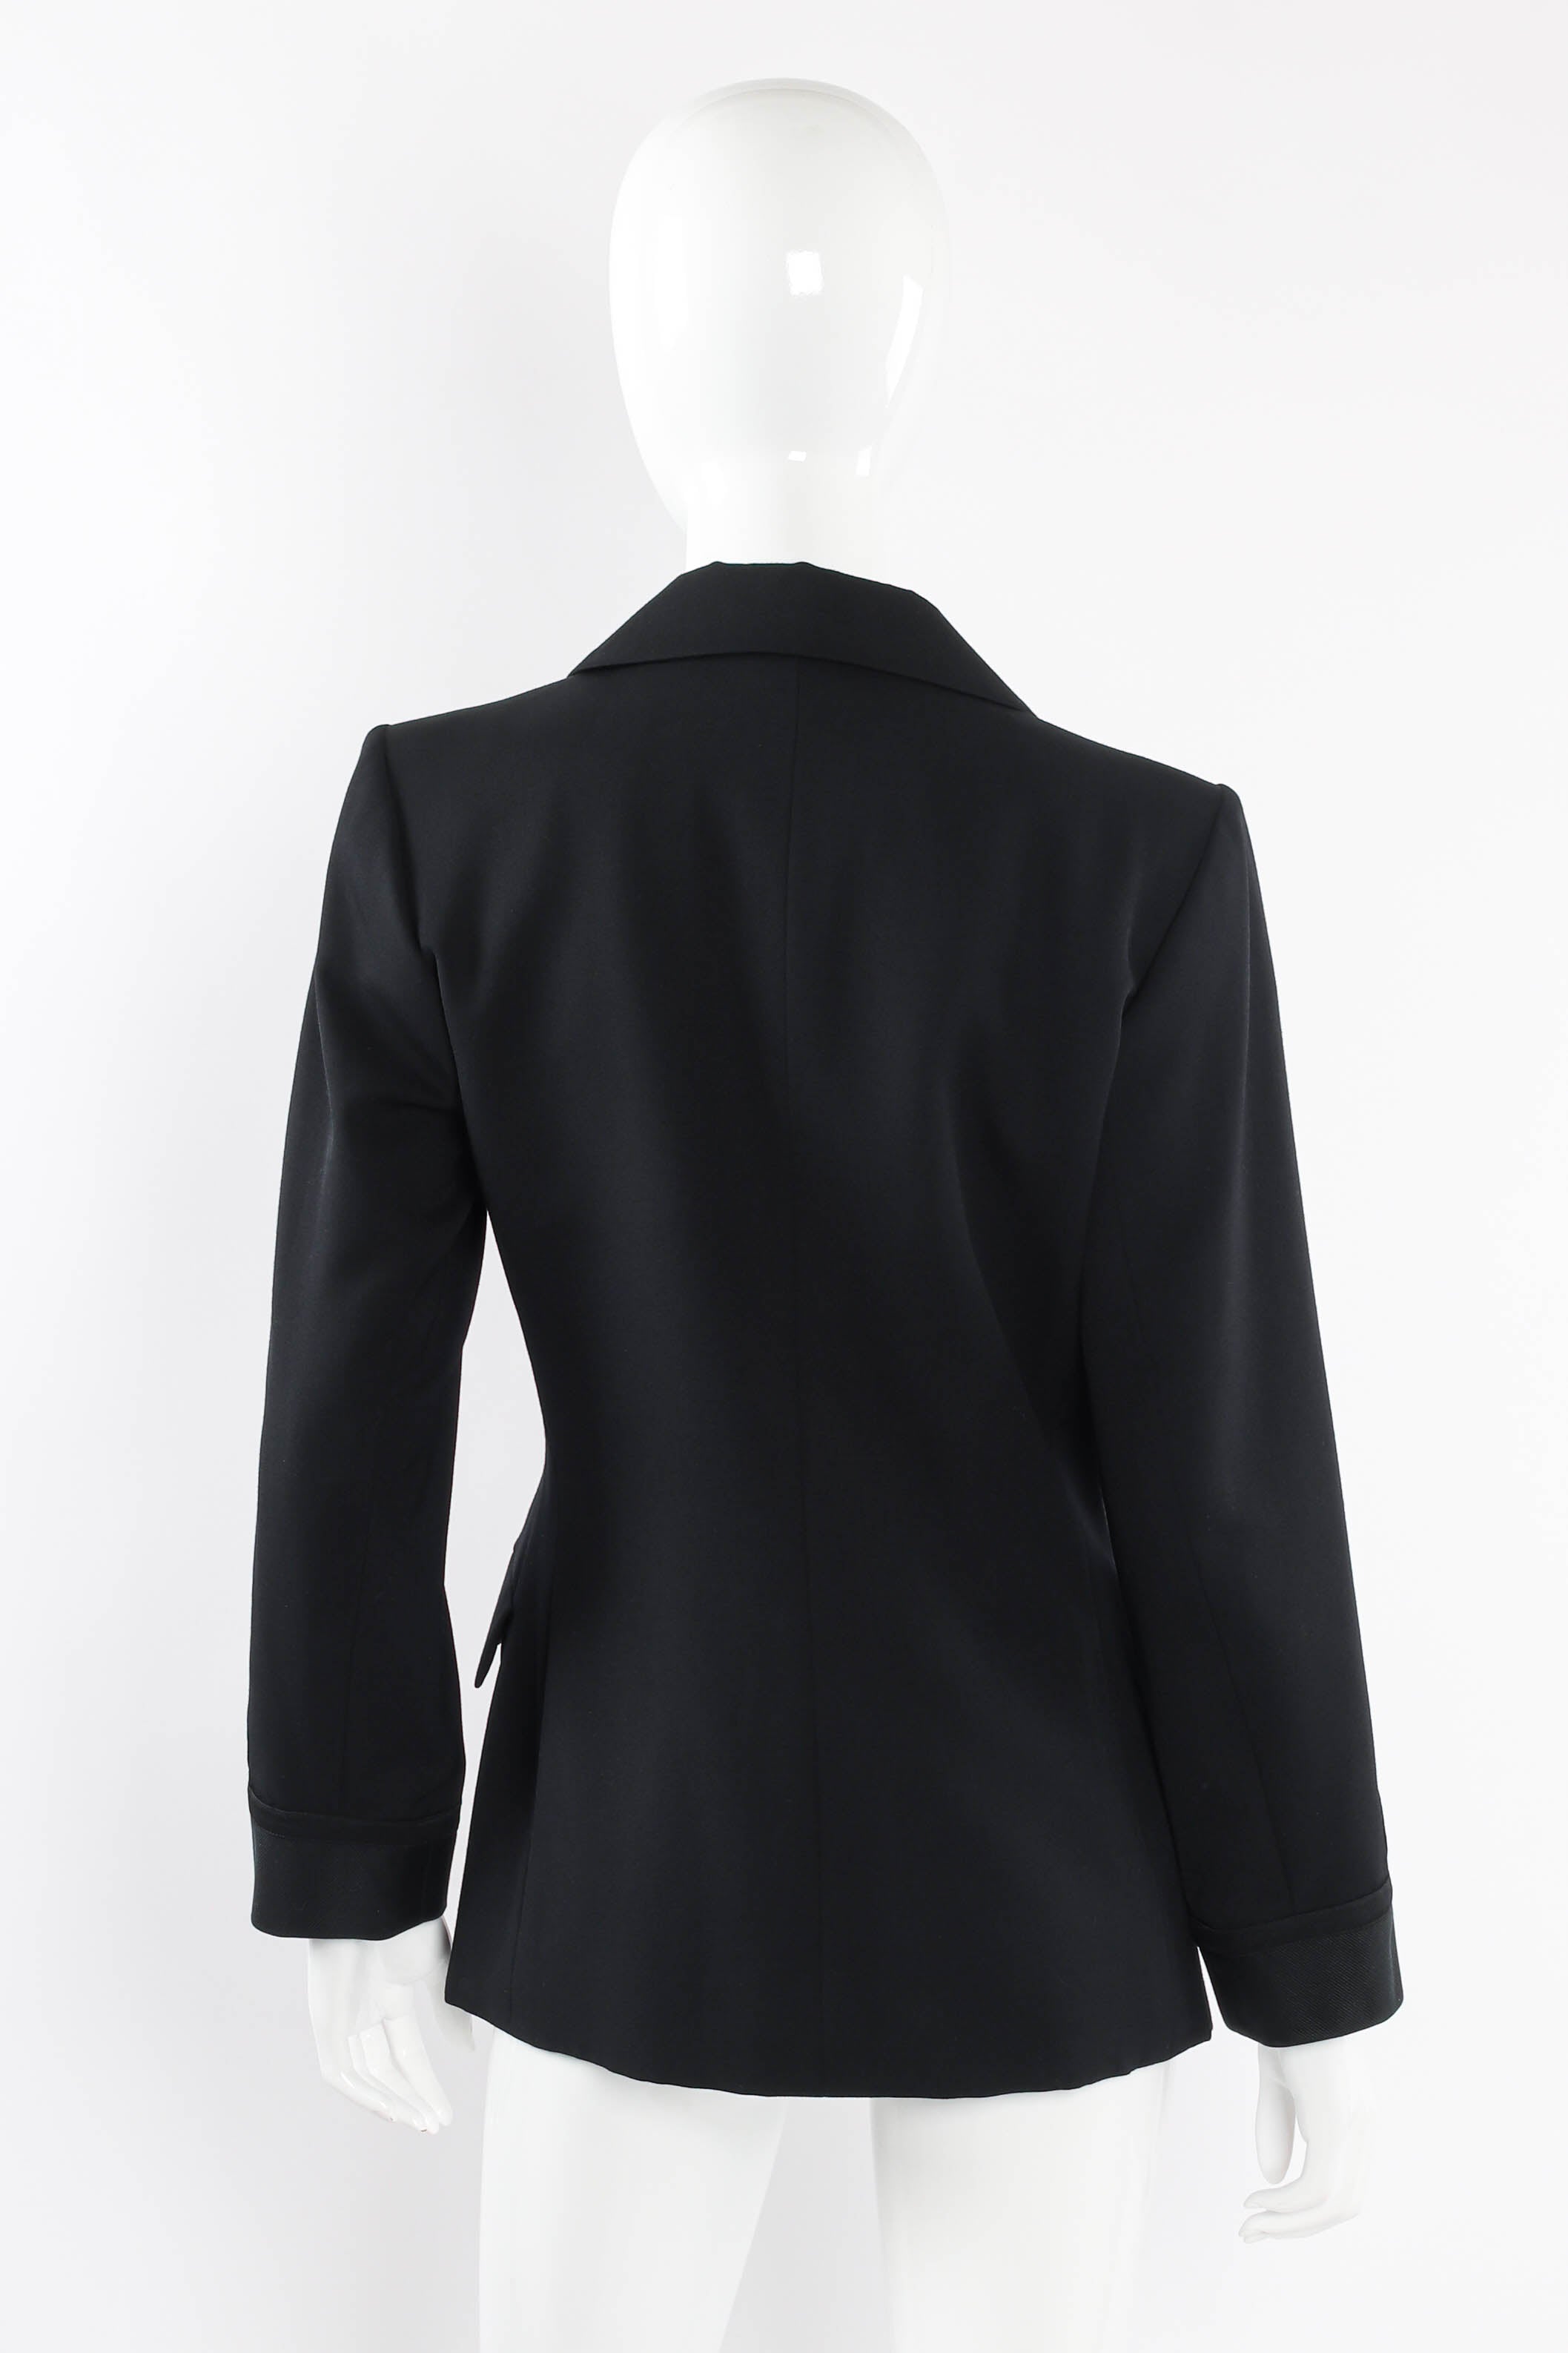 Vintage YSL Grosgrain Accented Tuxedo Jacket on mannequin back at Recess Los Angeles